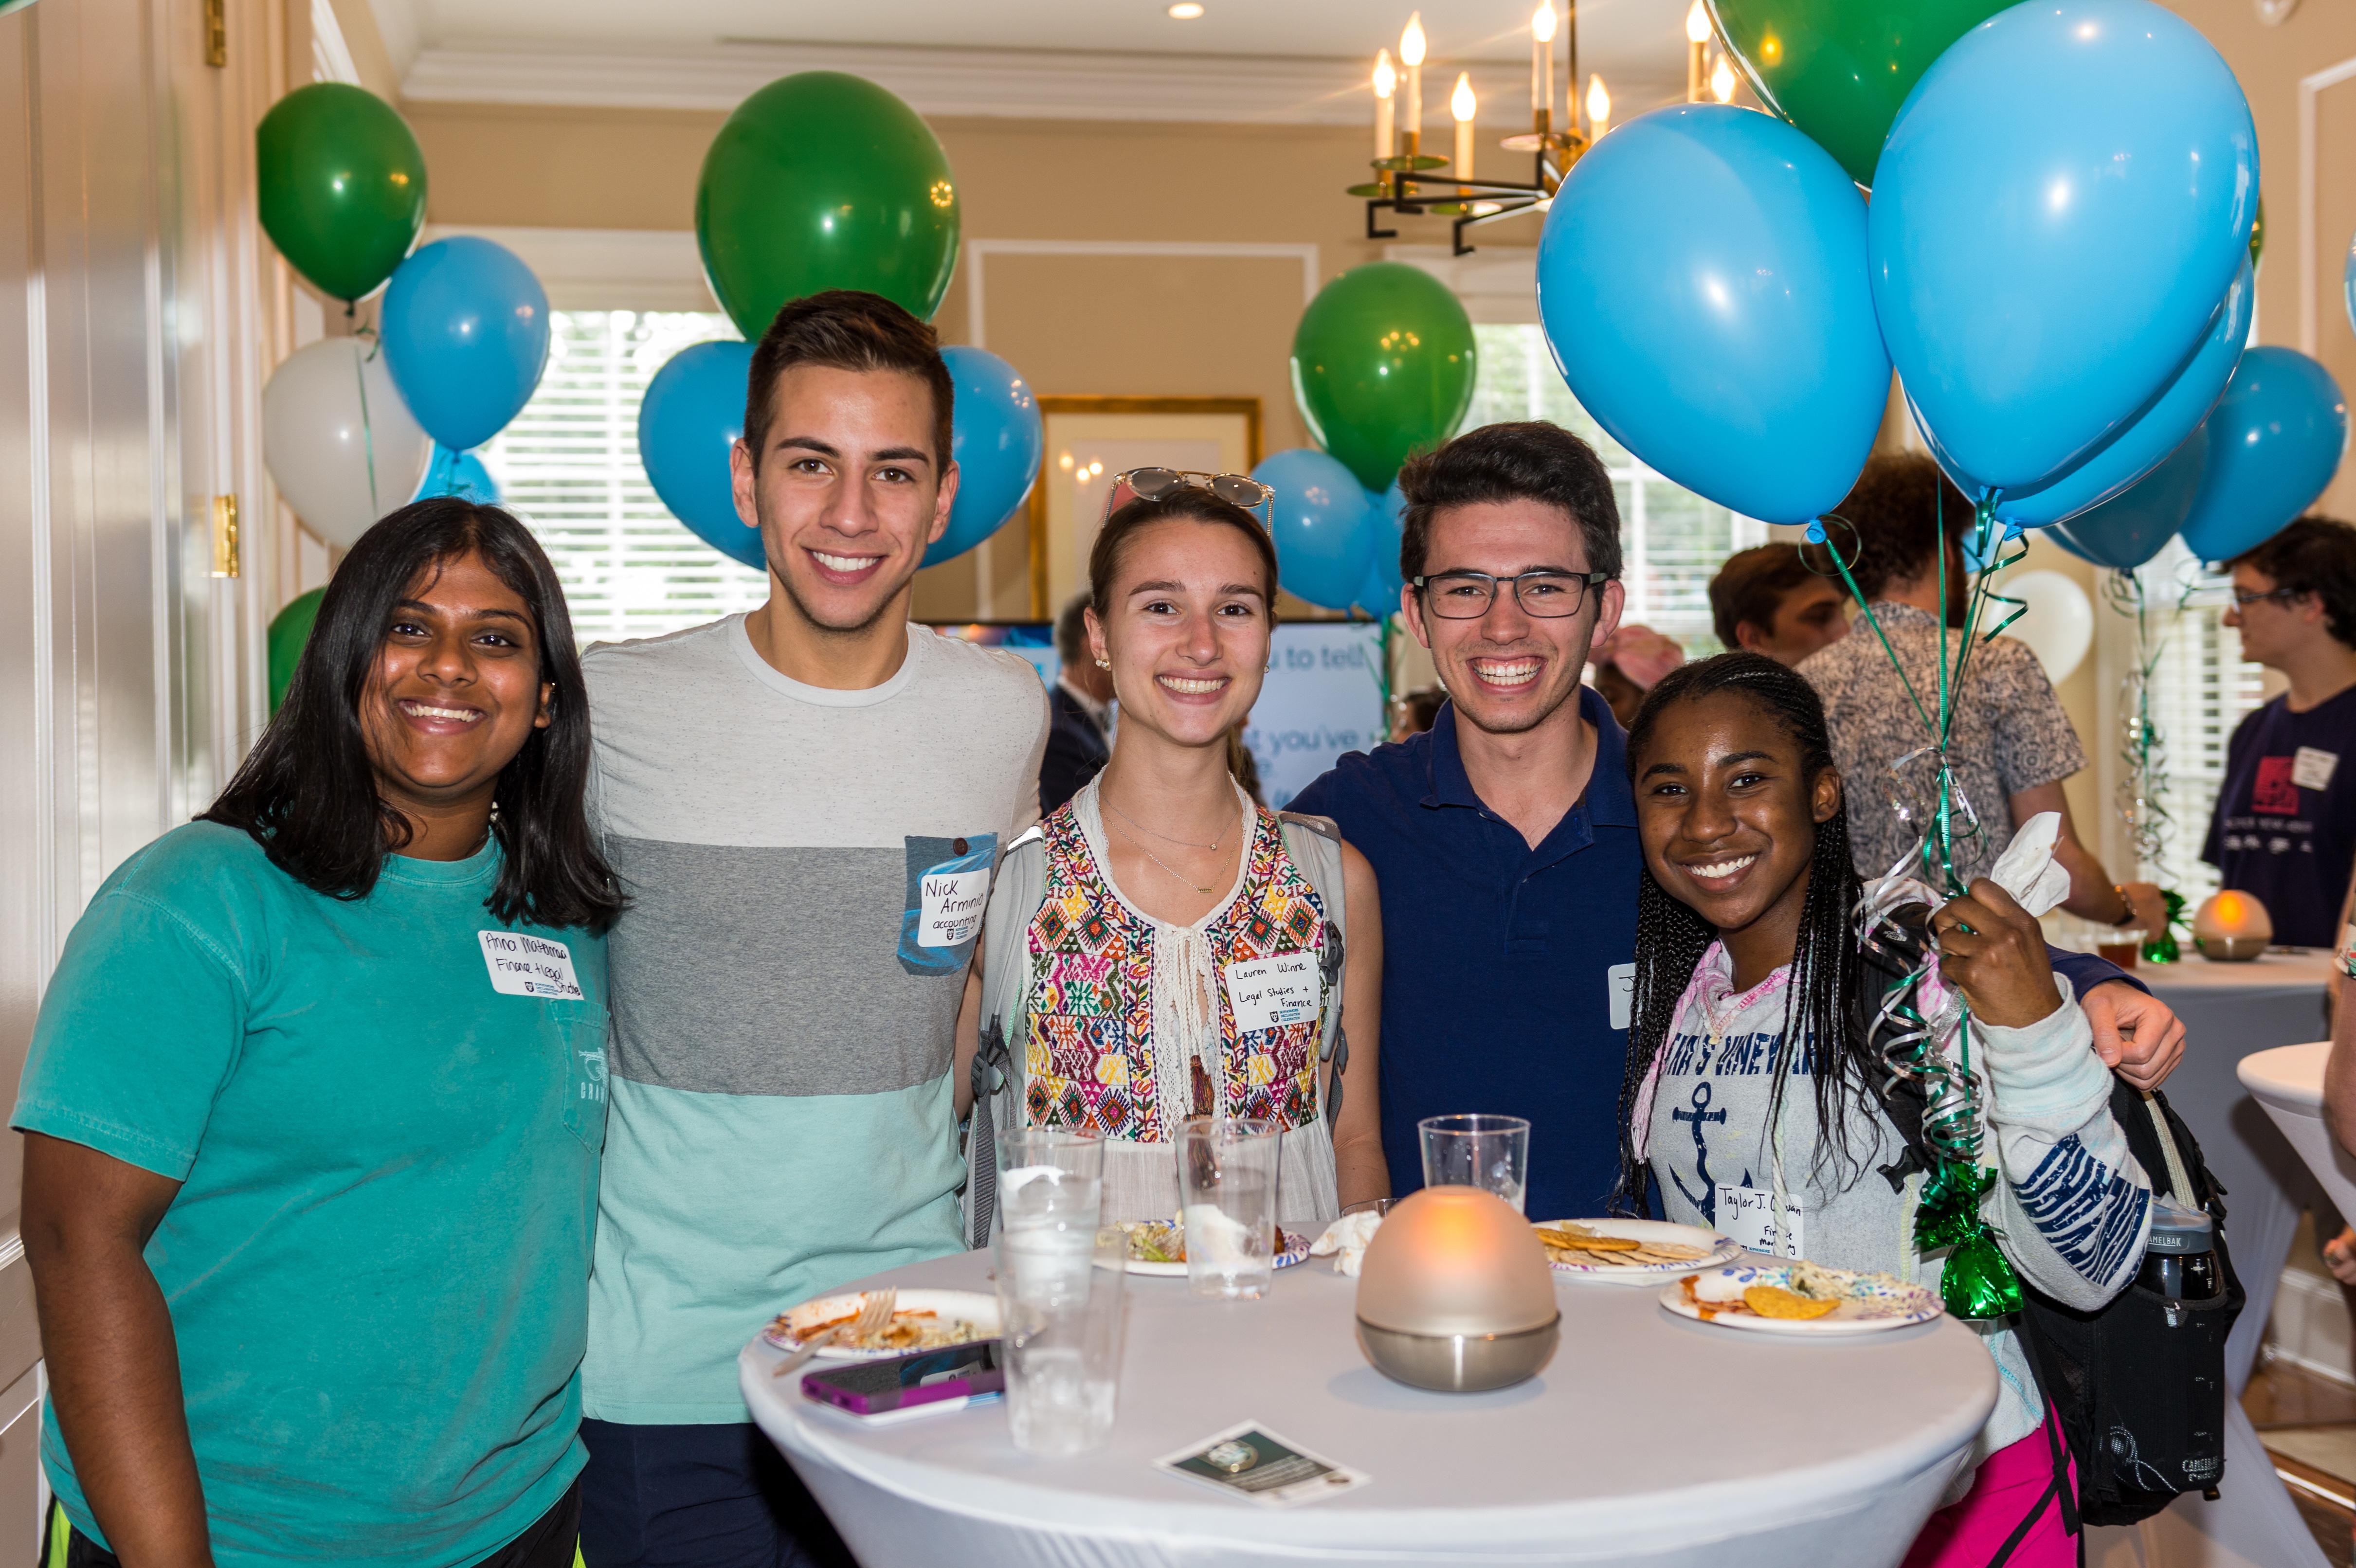 Scenes from the 2018 Sophomore Declaration Celebration held for the future Class of 2020 in the Bea Field Alumni House, April 12, 2018. Sophomores received their first piece of academic regalia and networked with alumni and university leadership.